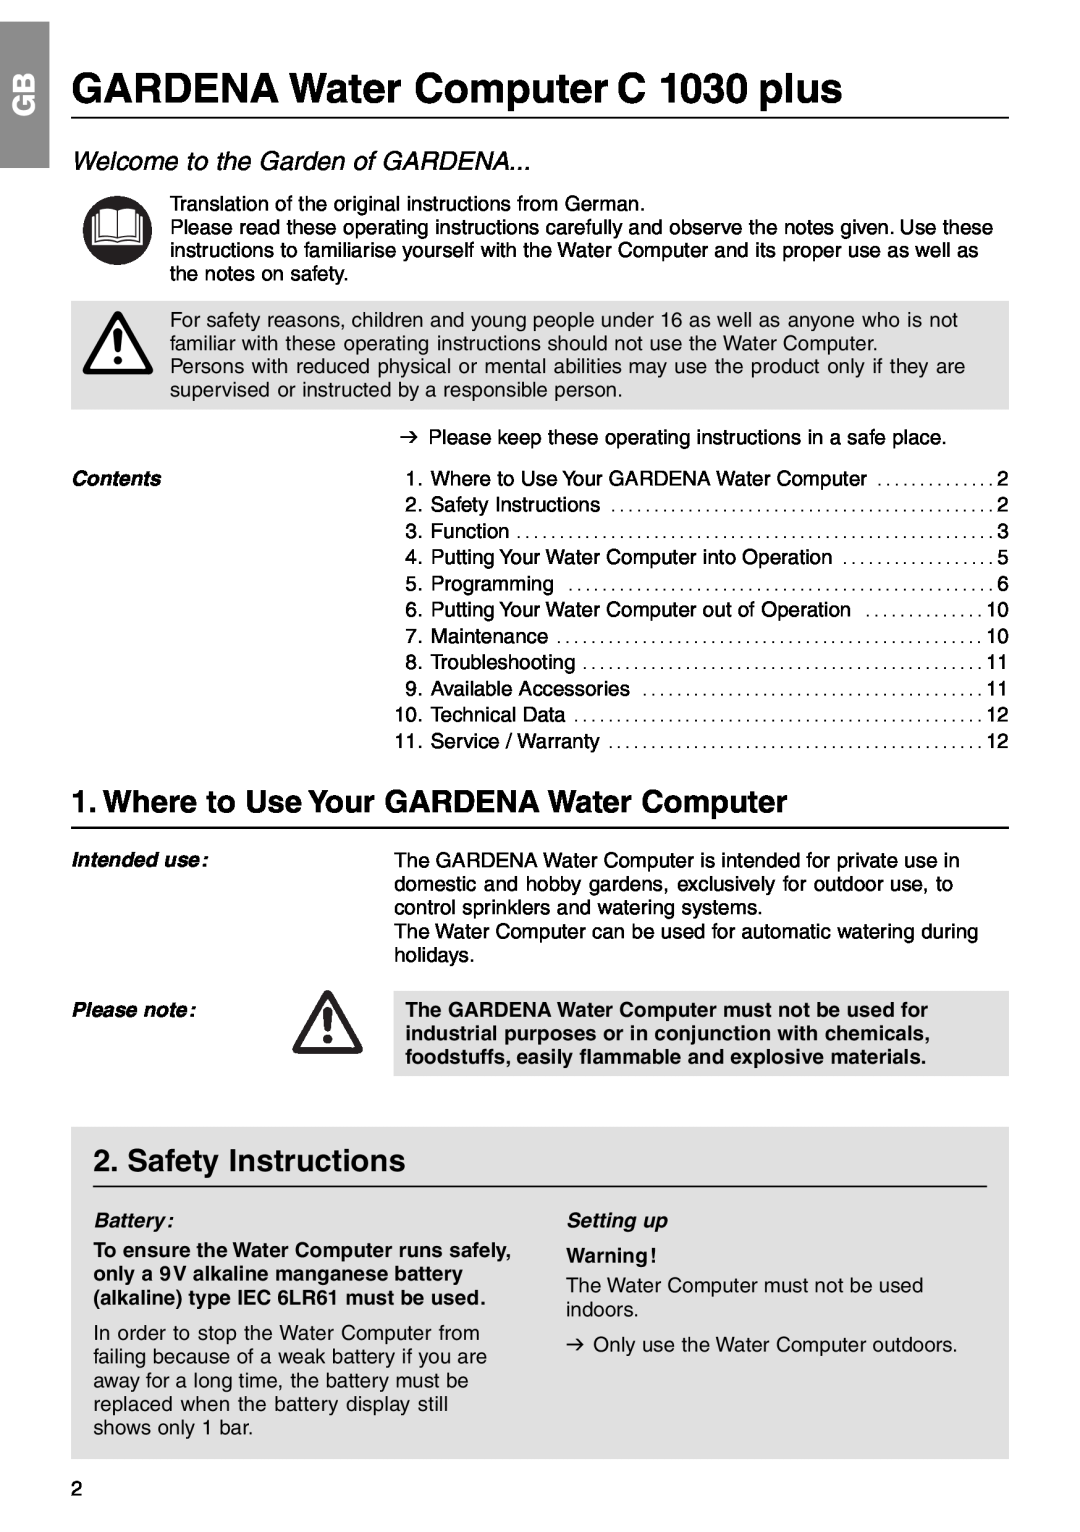 Gardena C 1030 plus Art. 1862 manual Where to Use Your GARDENA Water Computer, Safety Instructions 